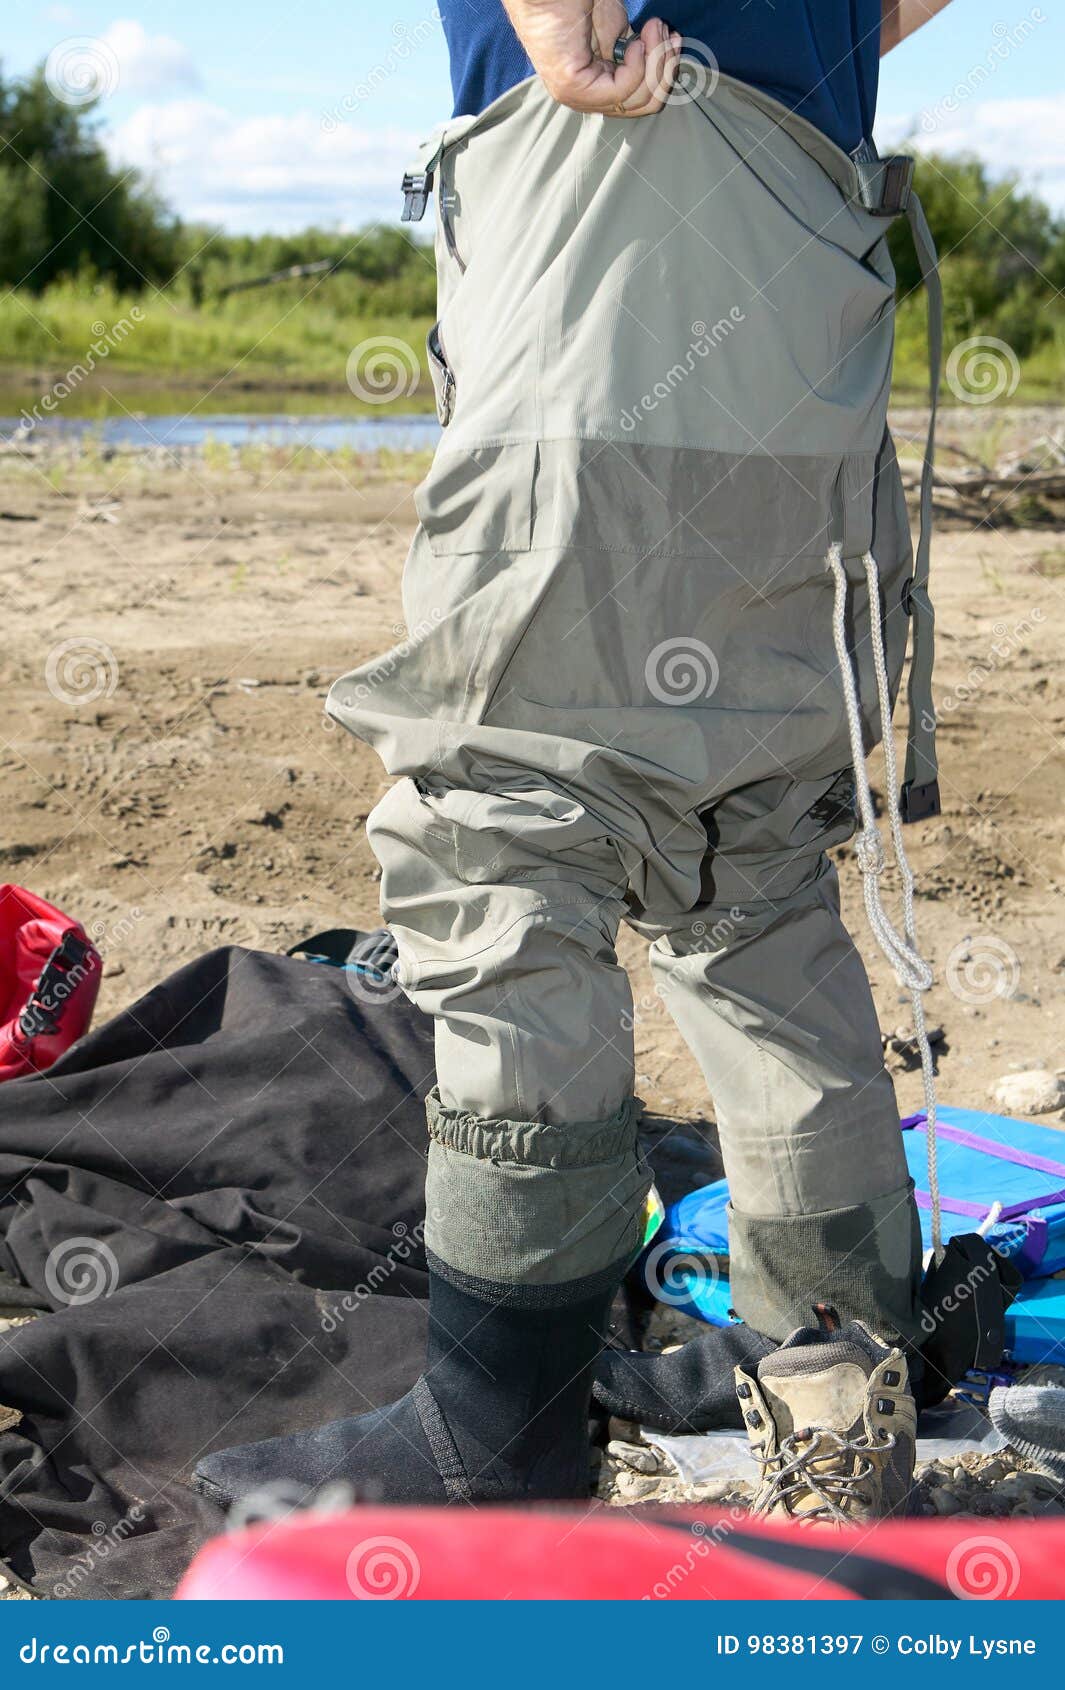 fisherman donning a pair of waders